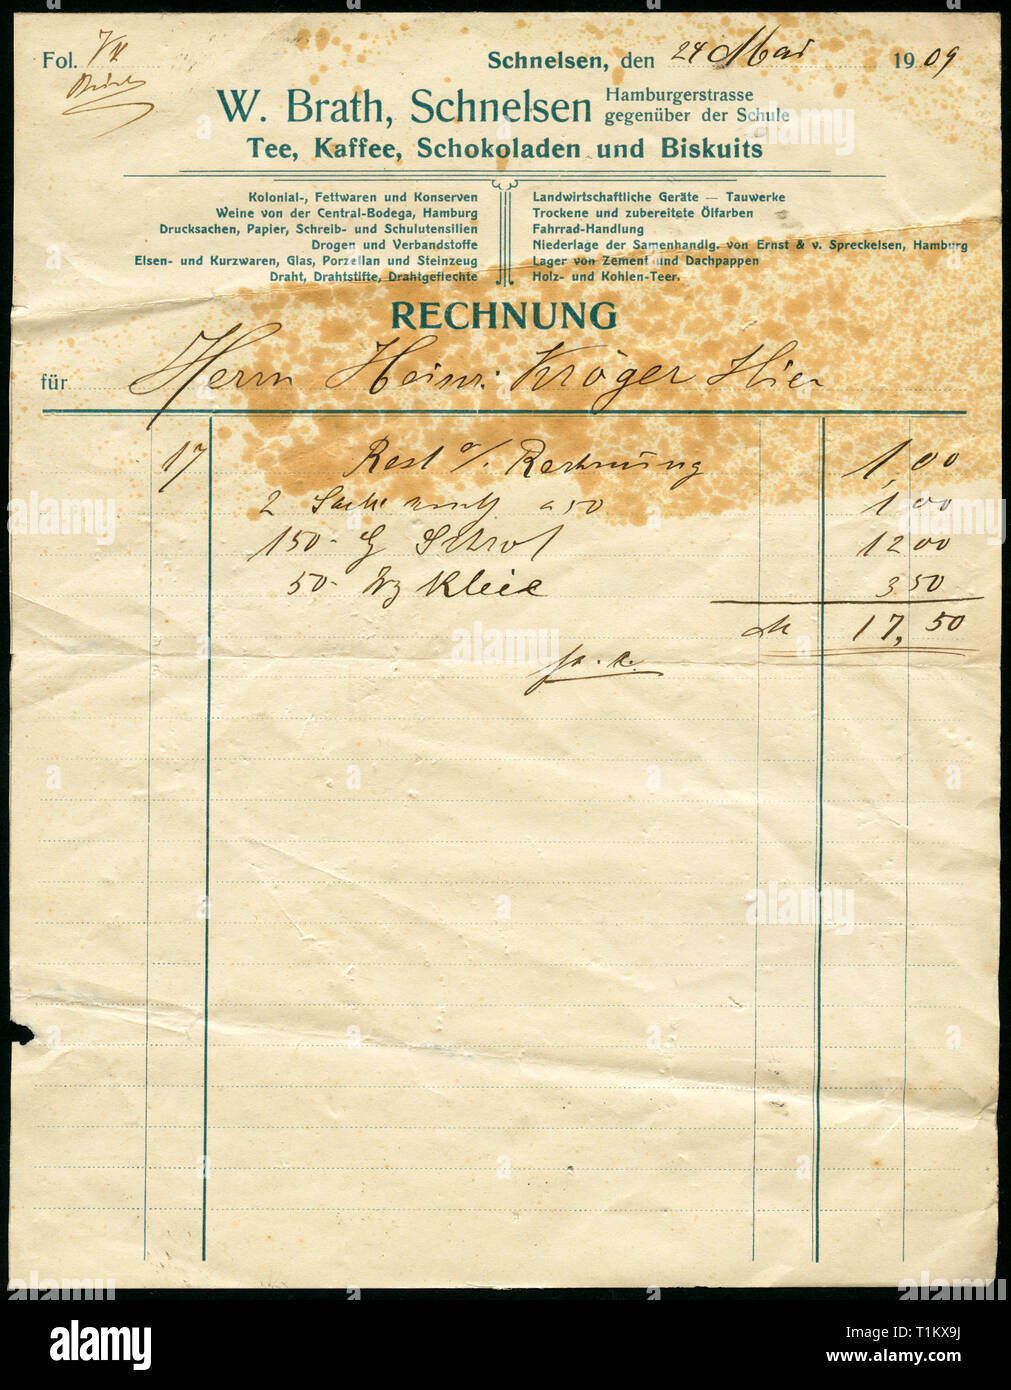 trade, Germany, Hamburg, Schnelsen, invoice of the colonial product business W. Brath for Heinrich Kröger, 24.03.1909., Additional-Rights-Clearance-Info-Not-Available Stock Photo